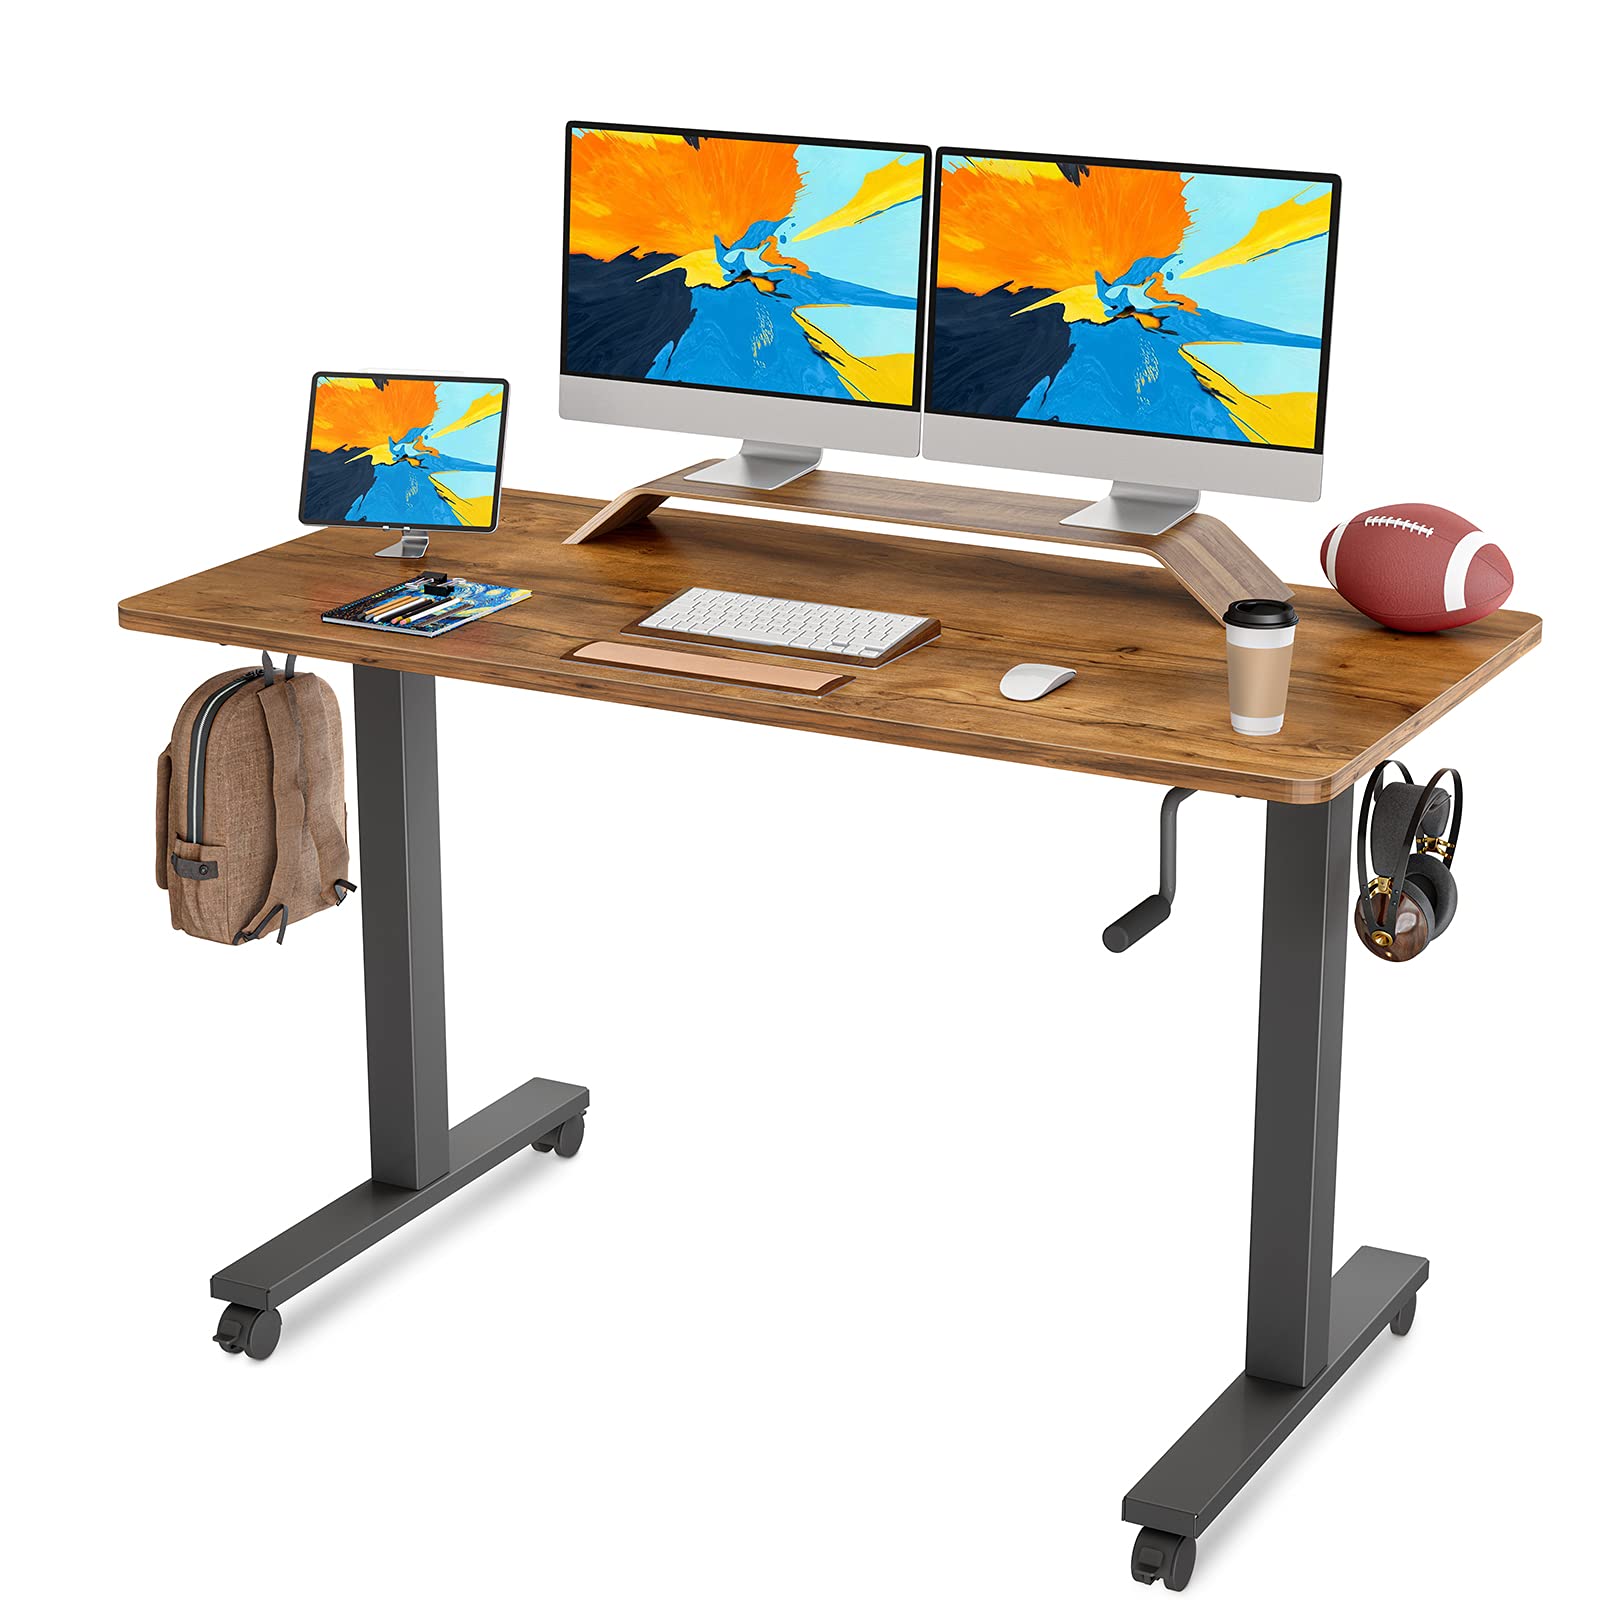 FAMISKY Crank Adjustable Height Standing Desk, 55 x 24 Inches Manual Stand up Desk, Sit Stand Workstation for Home Office with Handle and Splice Bo...